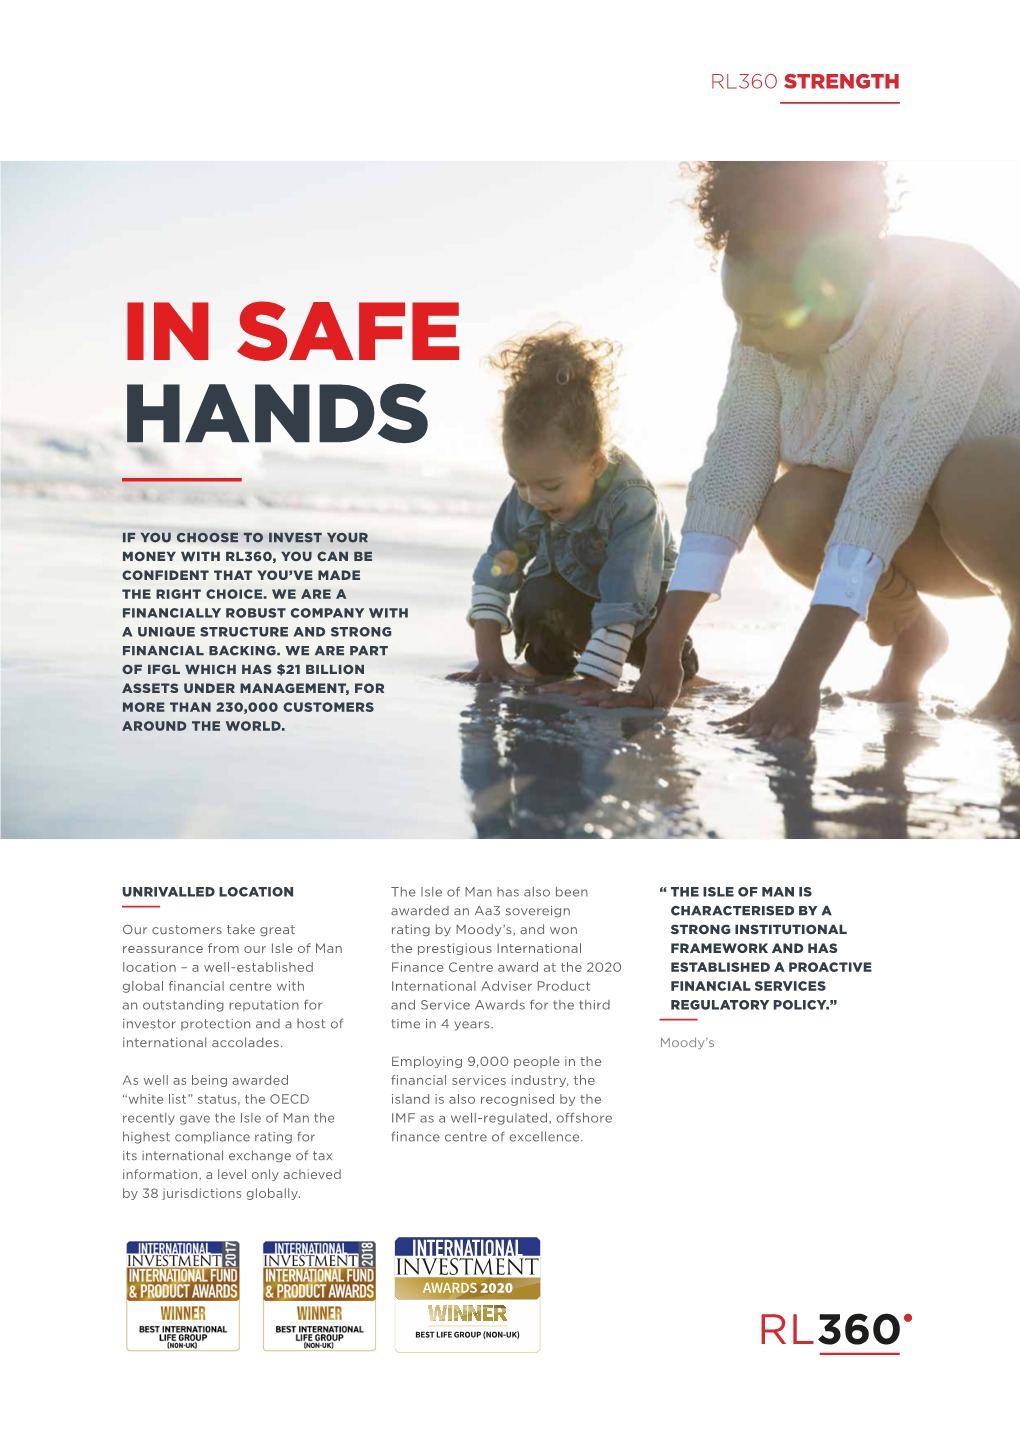 In Safe Hands with RL360